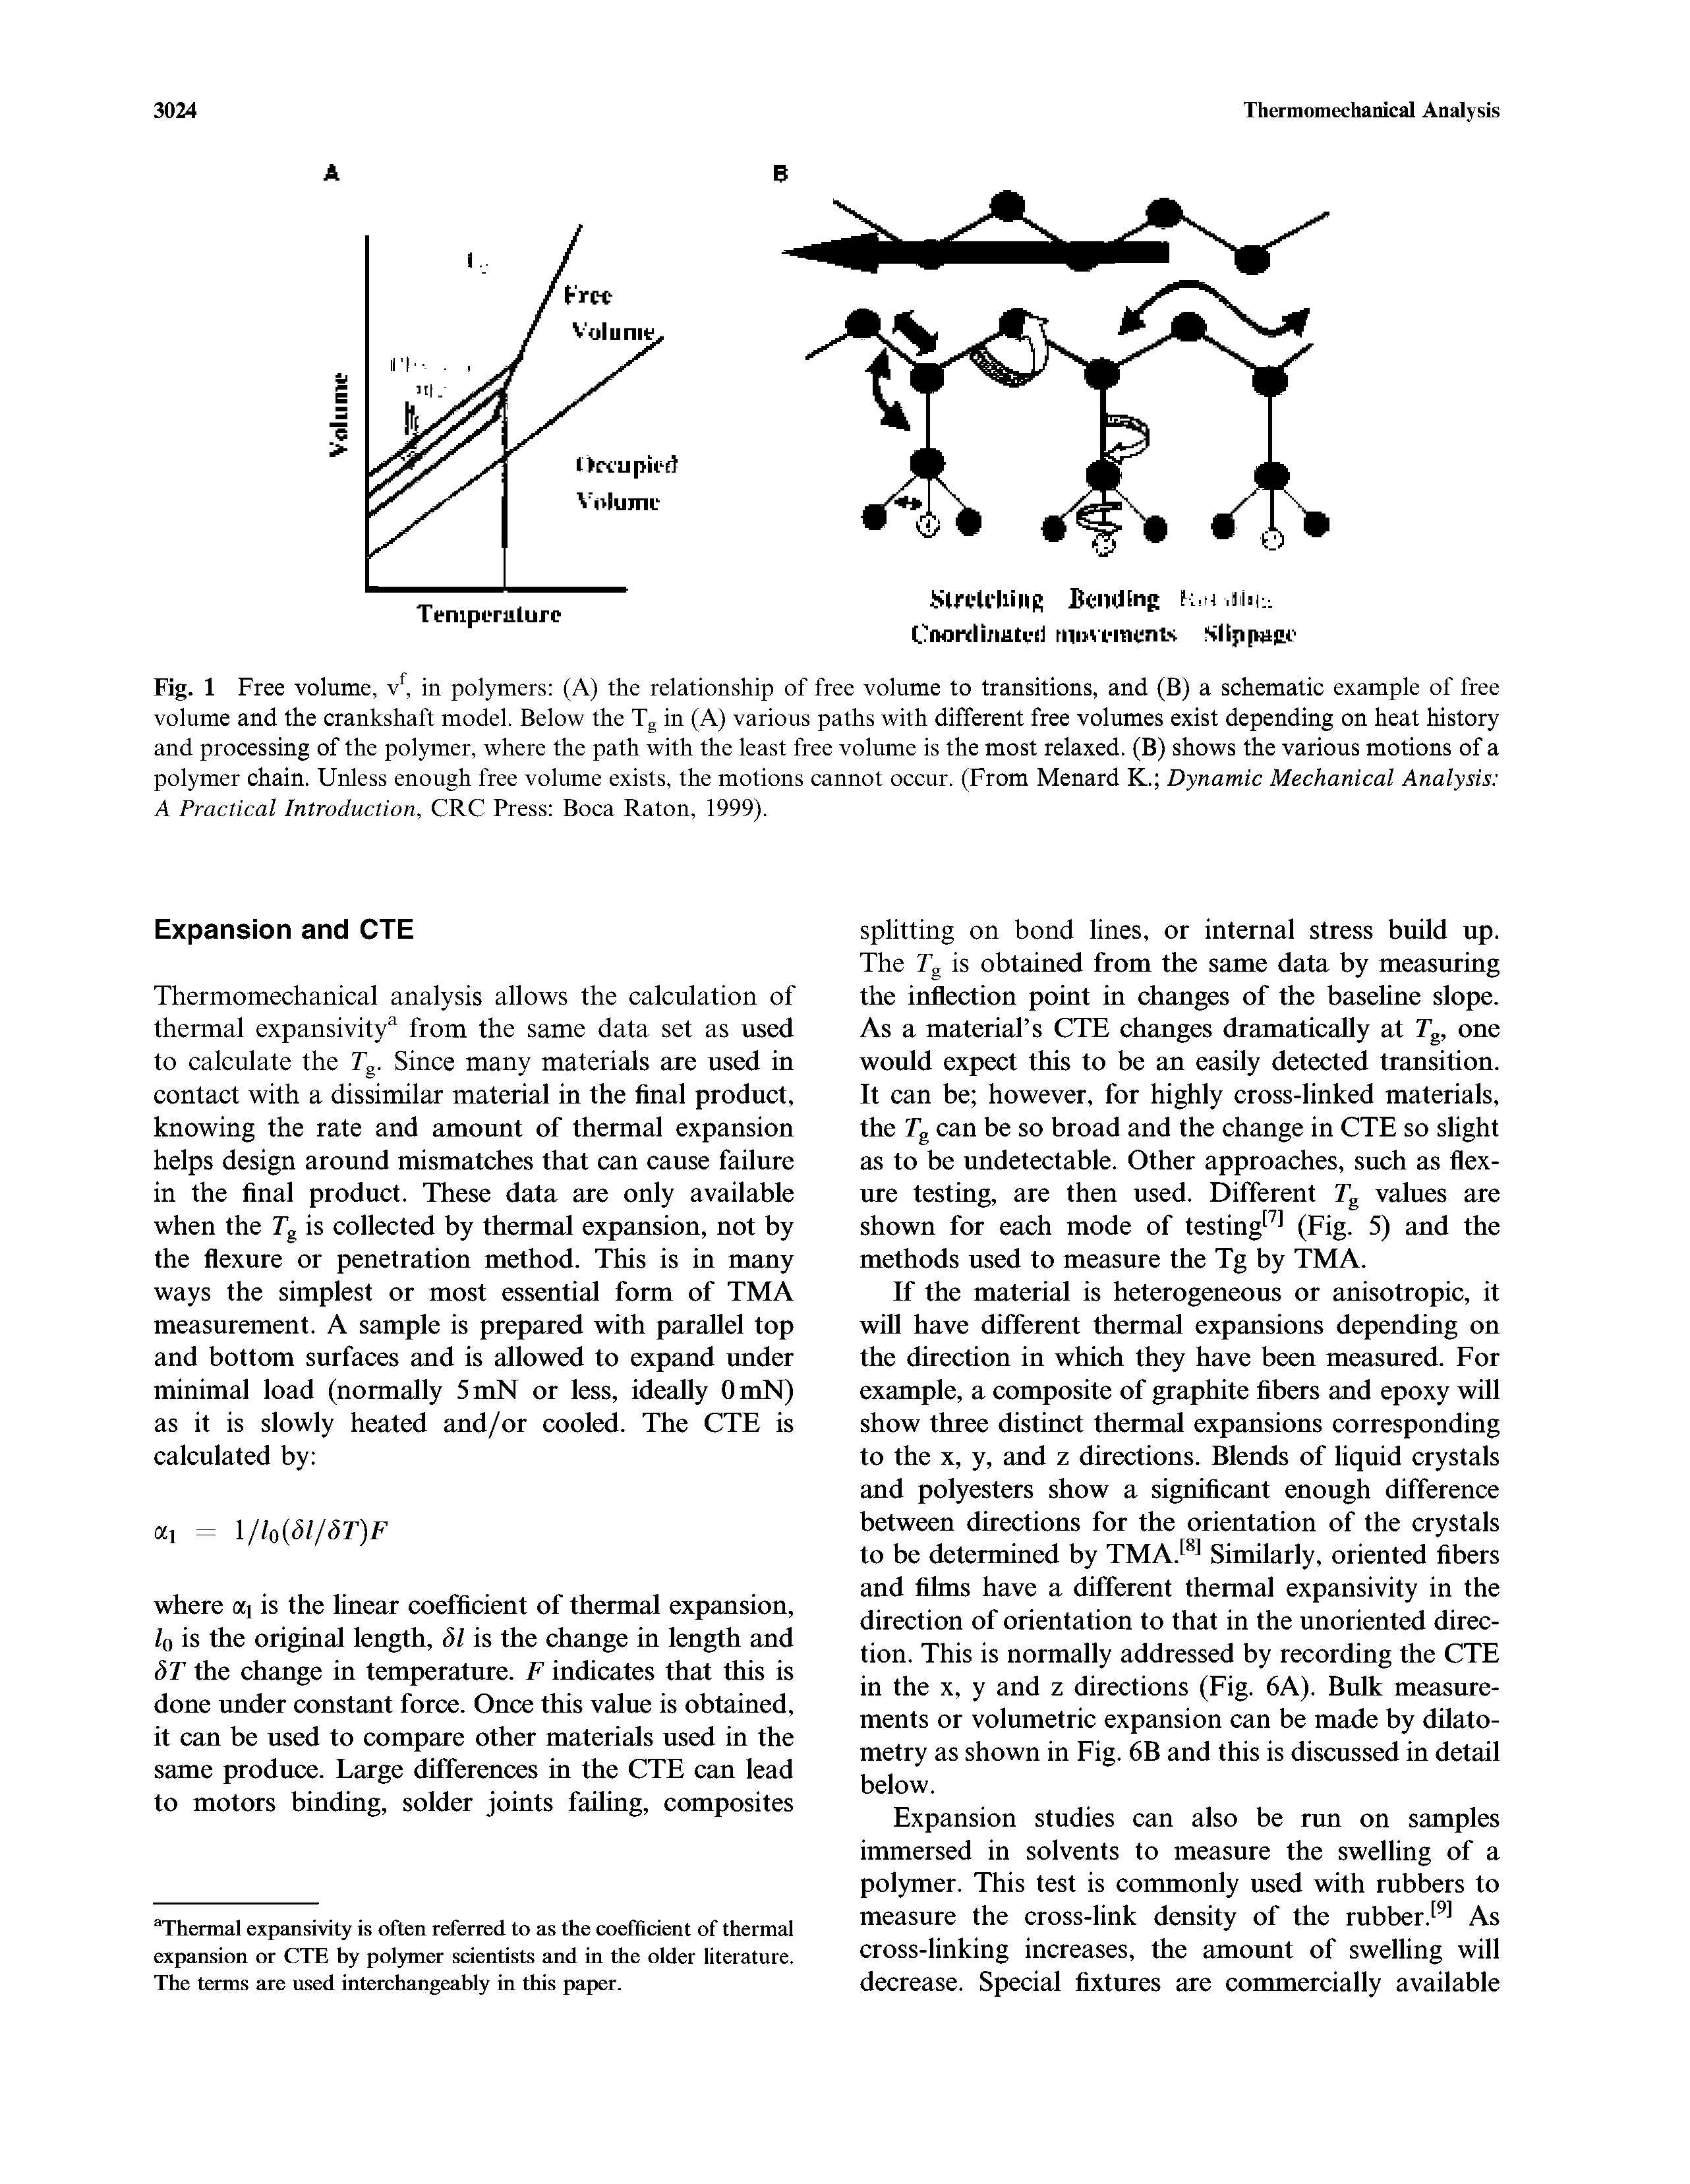 Fig. 1 Free volume, v, in polymers (A) the relationship of free volume to transitions, and (B) a schematic example of free volume and the crankshaft model. Below the Tg in (A) various paths with different free volumes exist depending on heat history and processing of the polymer, where the path with the least free volume is the most relaxed. (B) shows the various motions of a polymer chain. Unless enough free volume exists, the motions cannot occur. (From Menard K. Dynamic Mechanical Analysis A Practical Introduction, CRC Press Boca Raton, 1999).